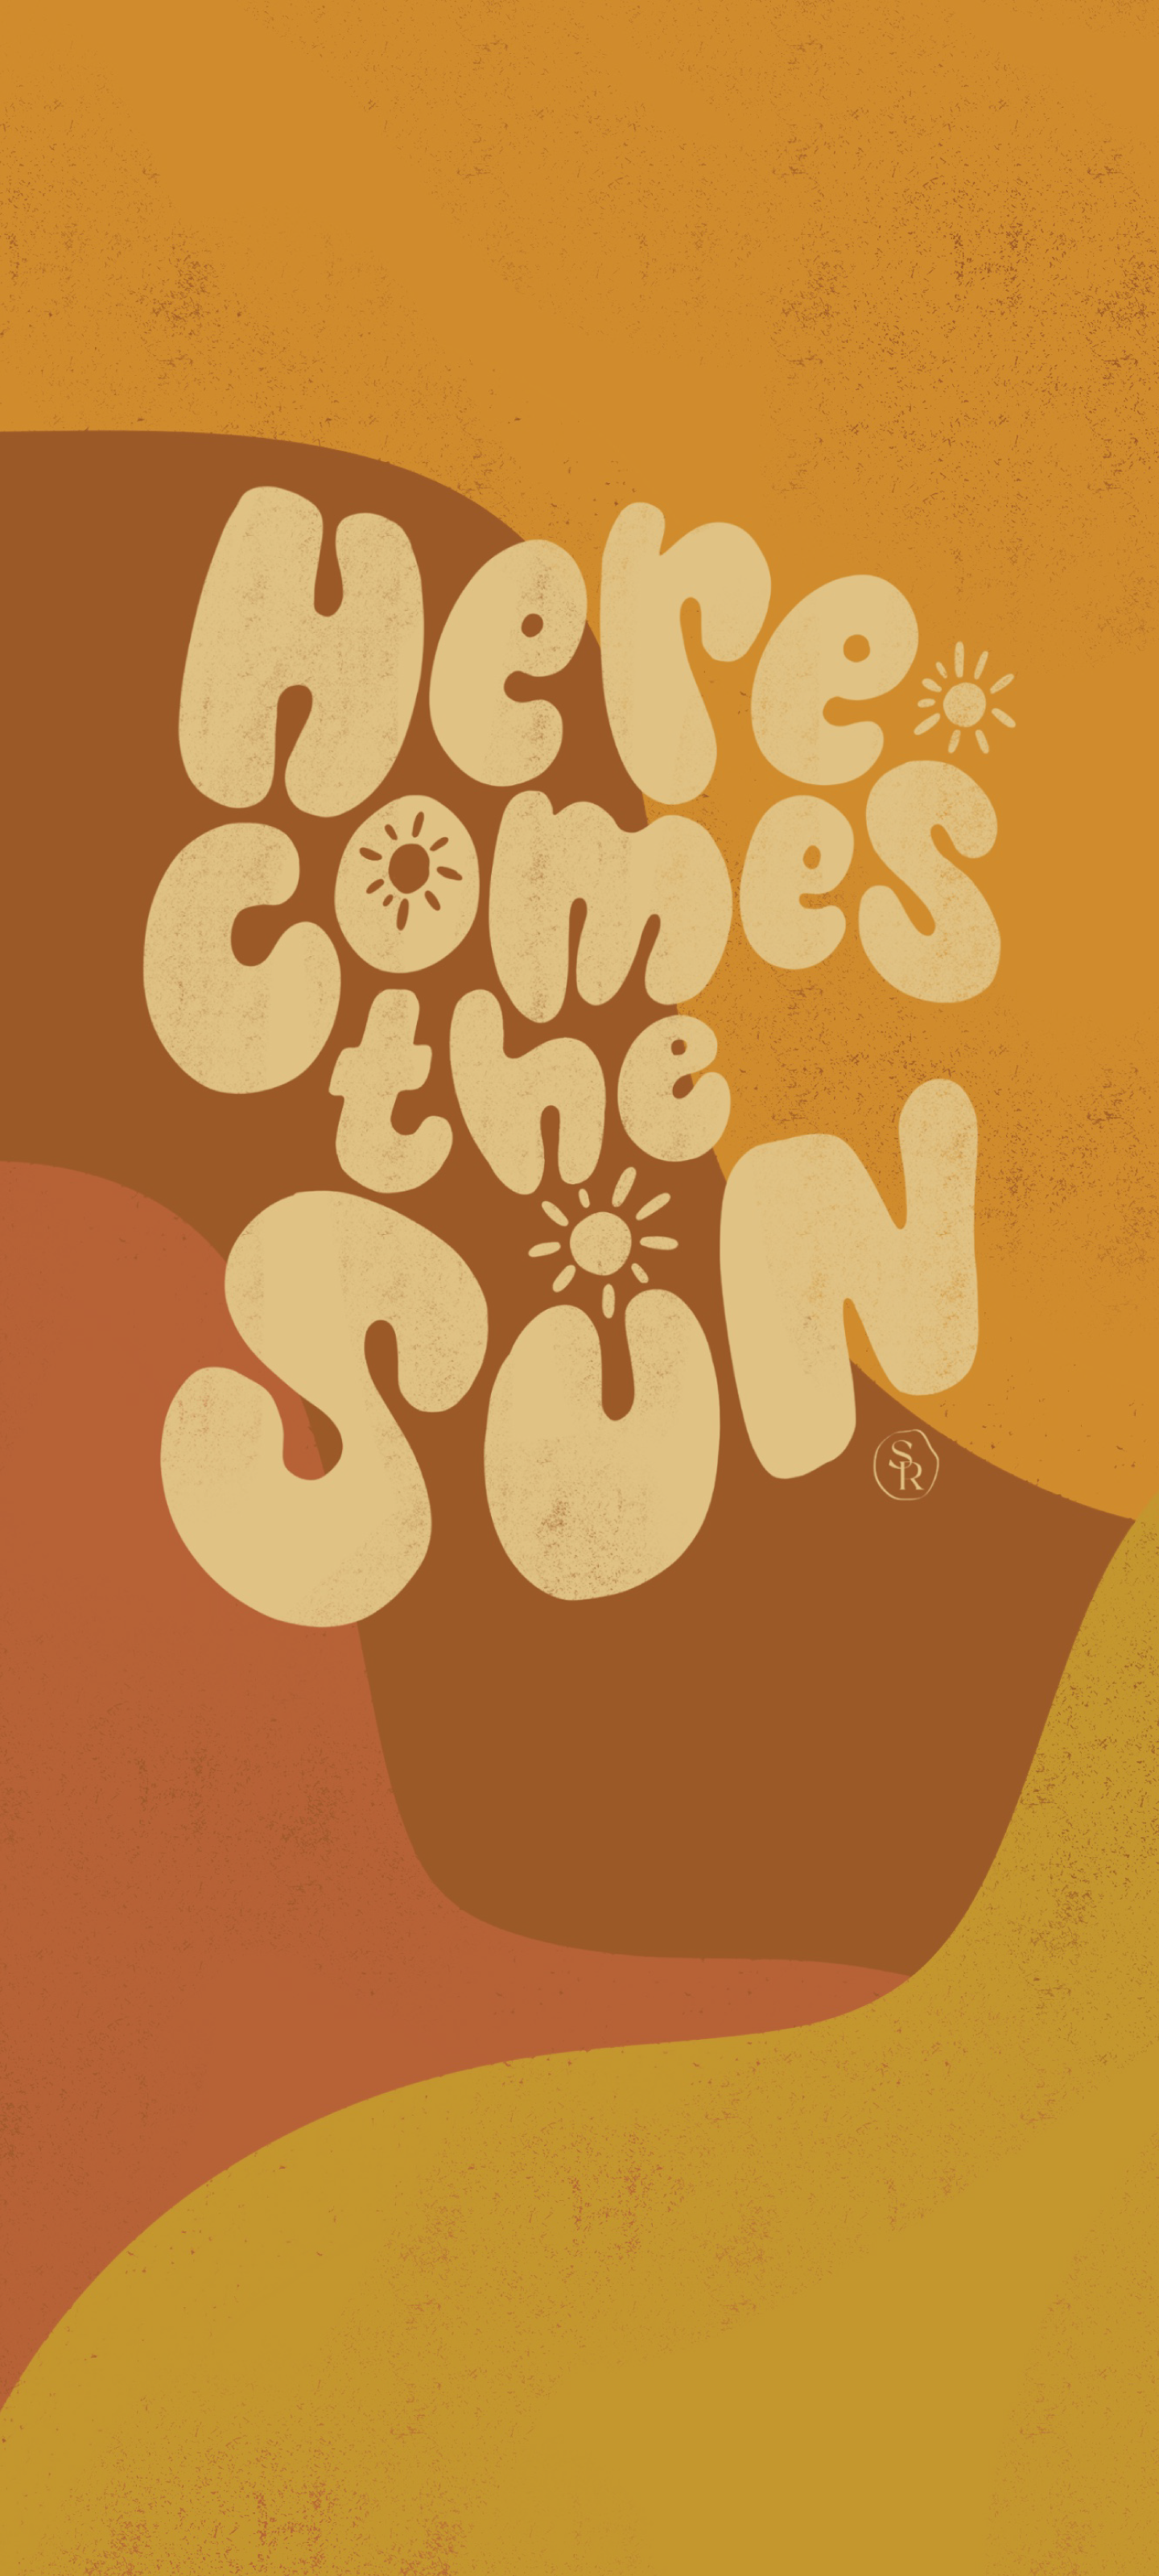 Here Comes the Sun